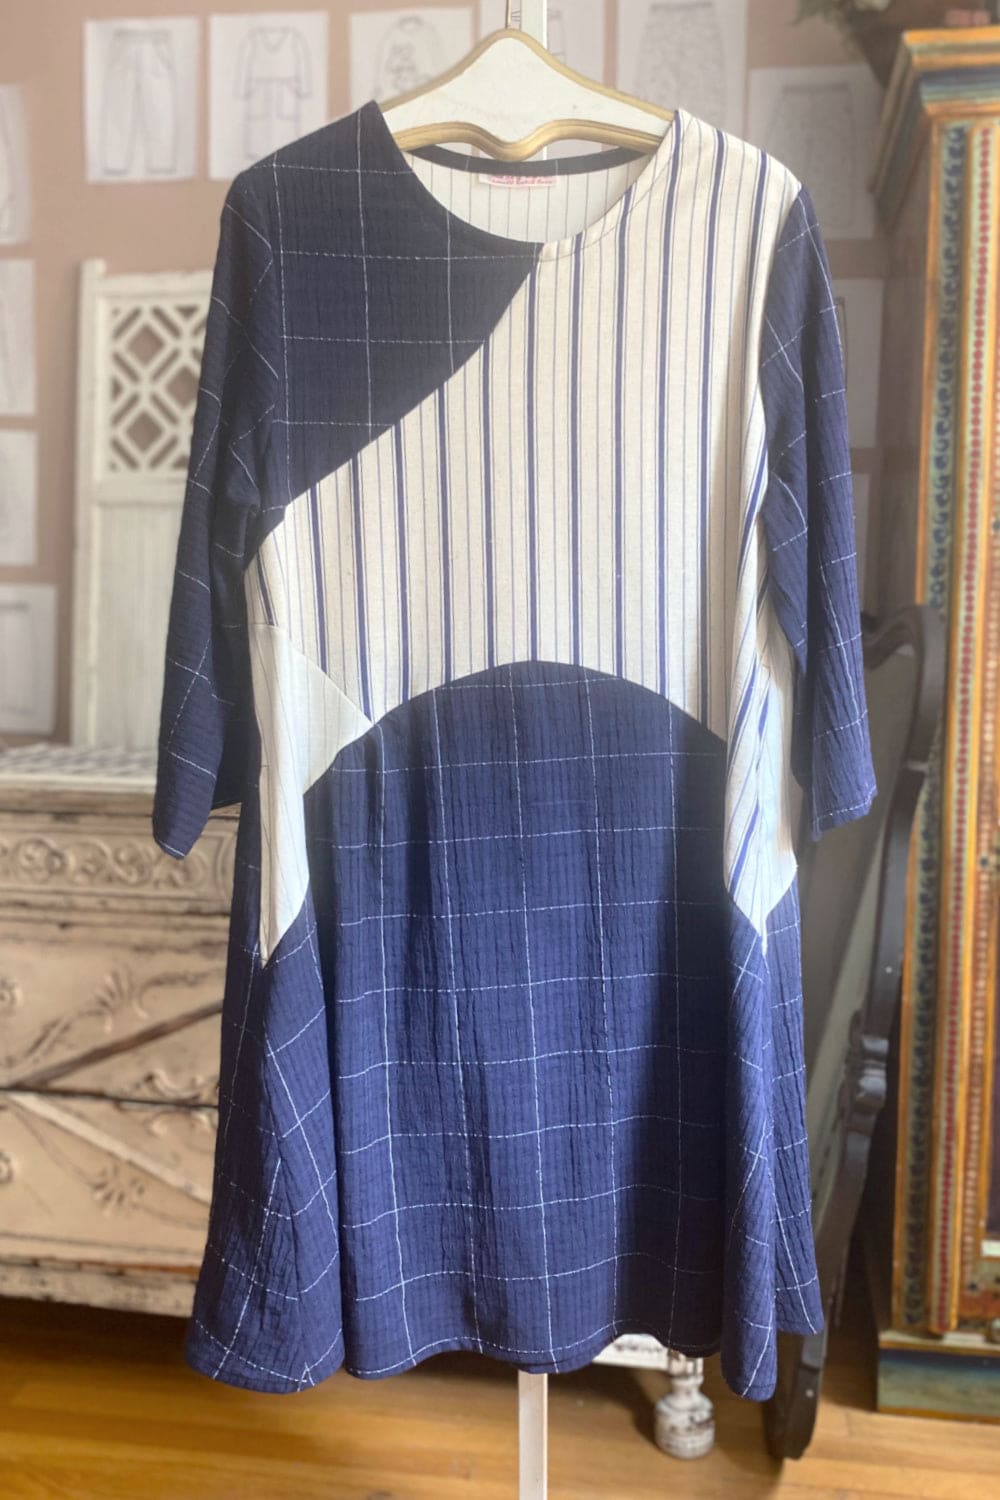 Multi pattern in blues and natural seamed detail tunic with stripes.